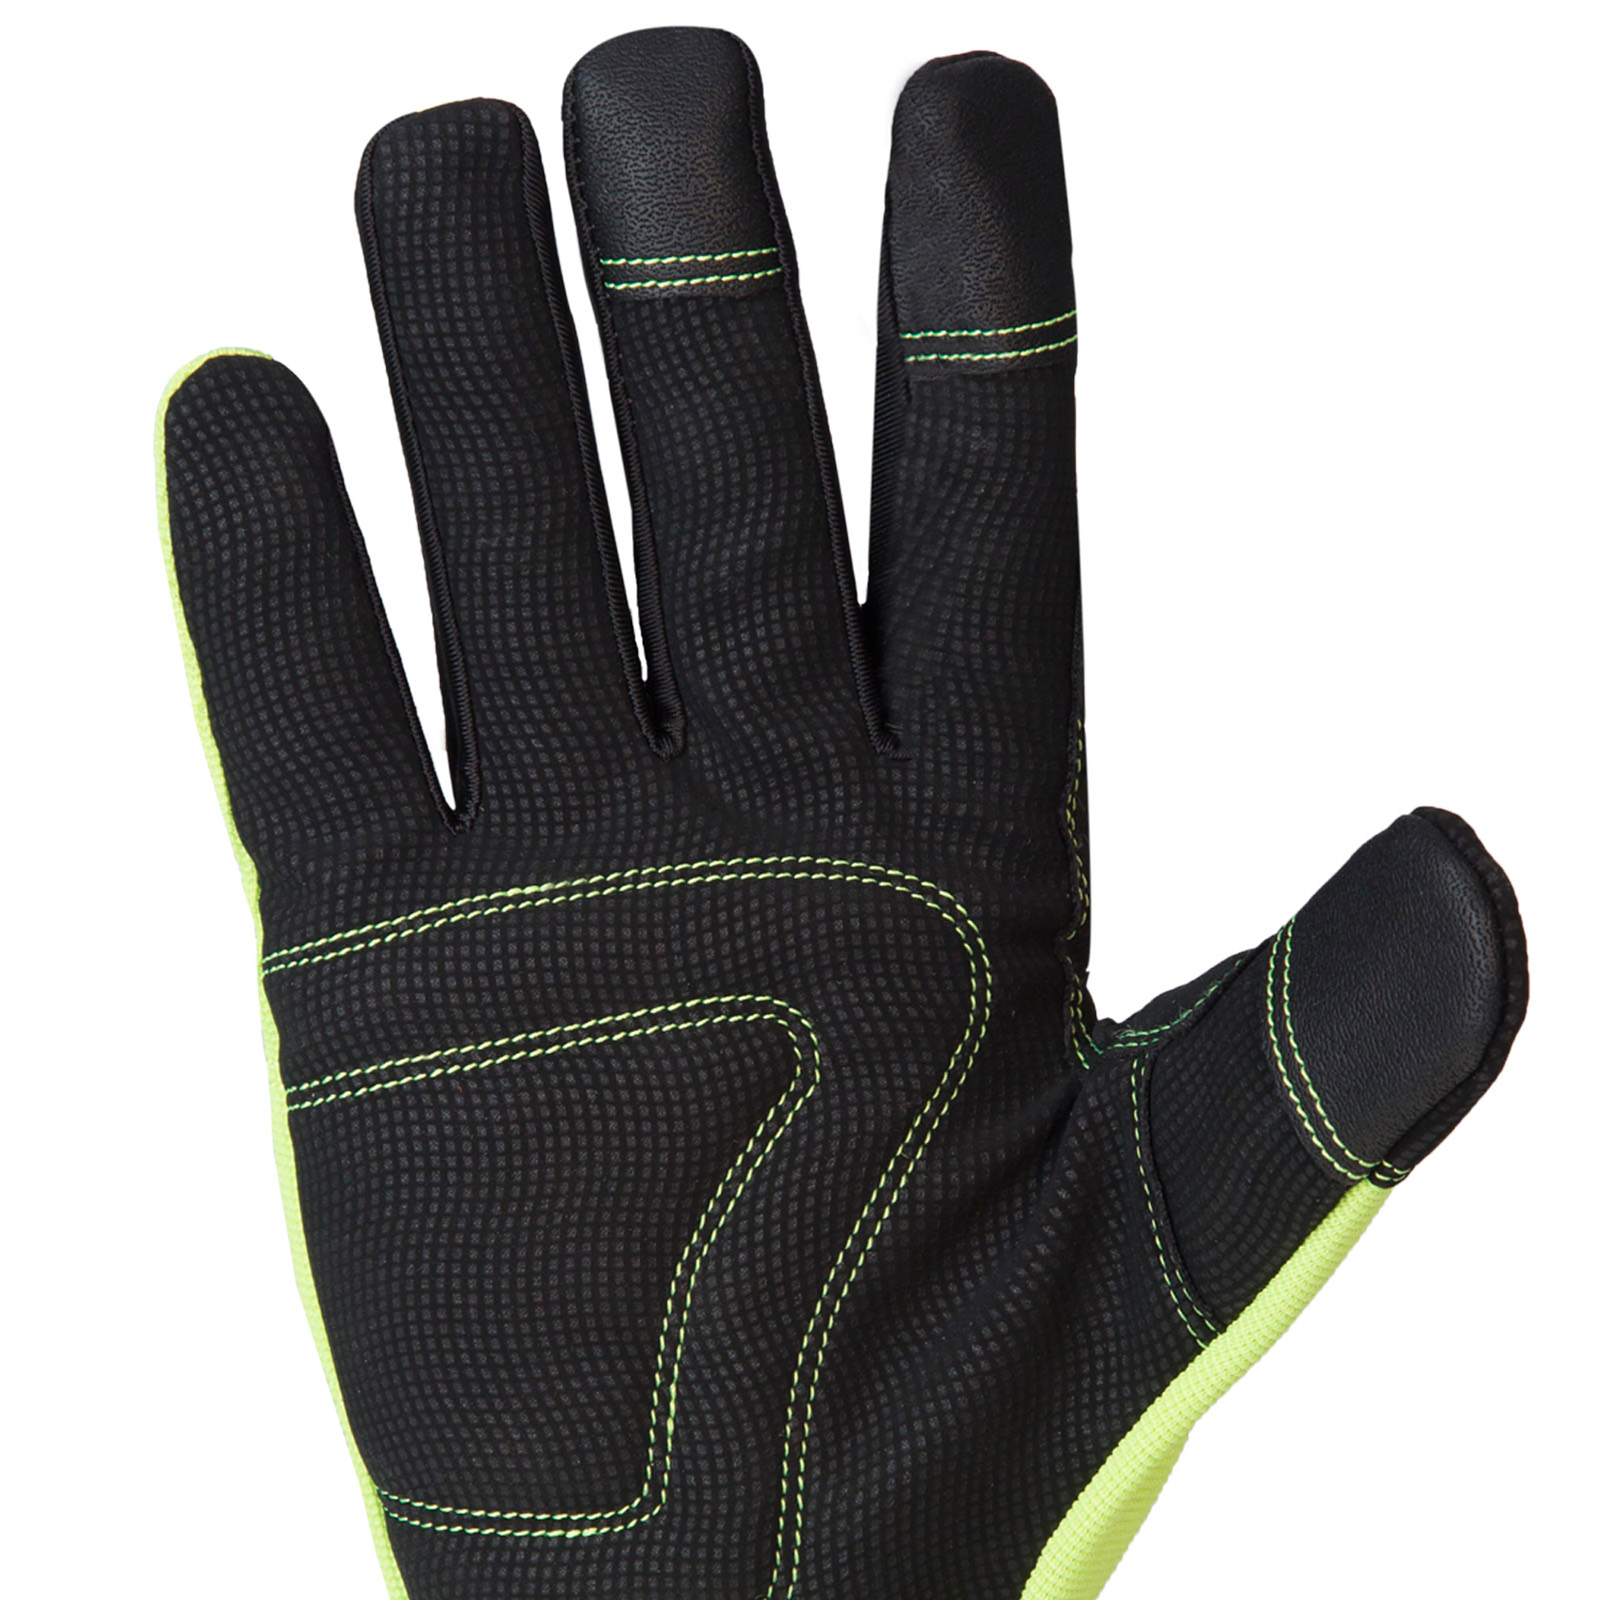 Palm side of the JORESTECH touchscreen breathable safety glove for mechanics